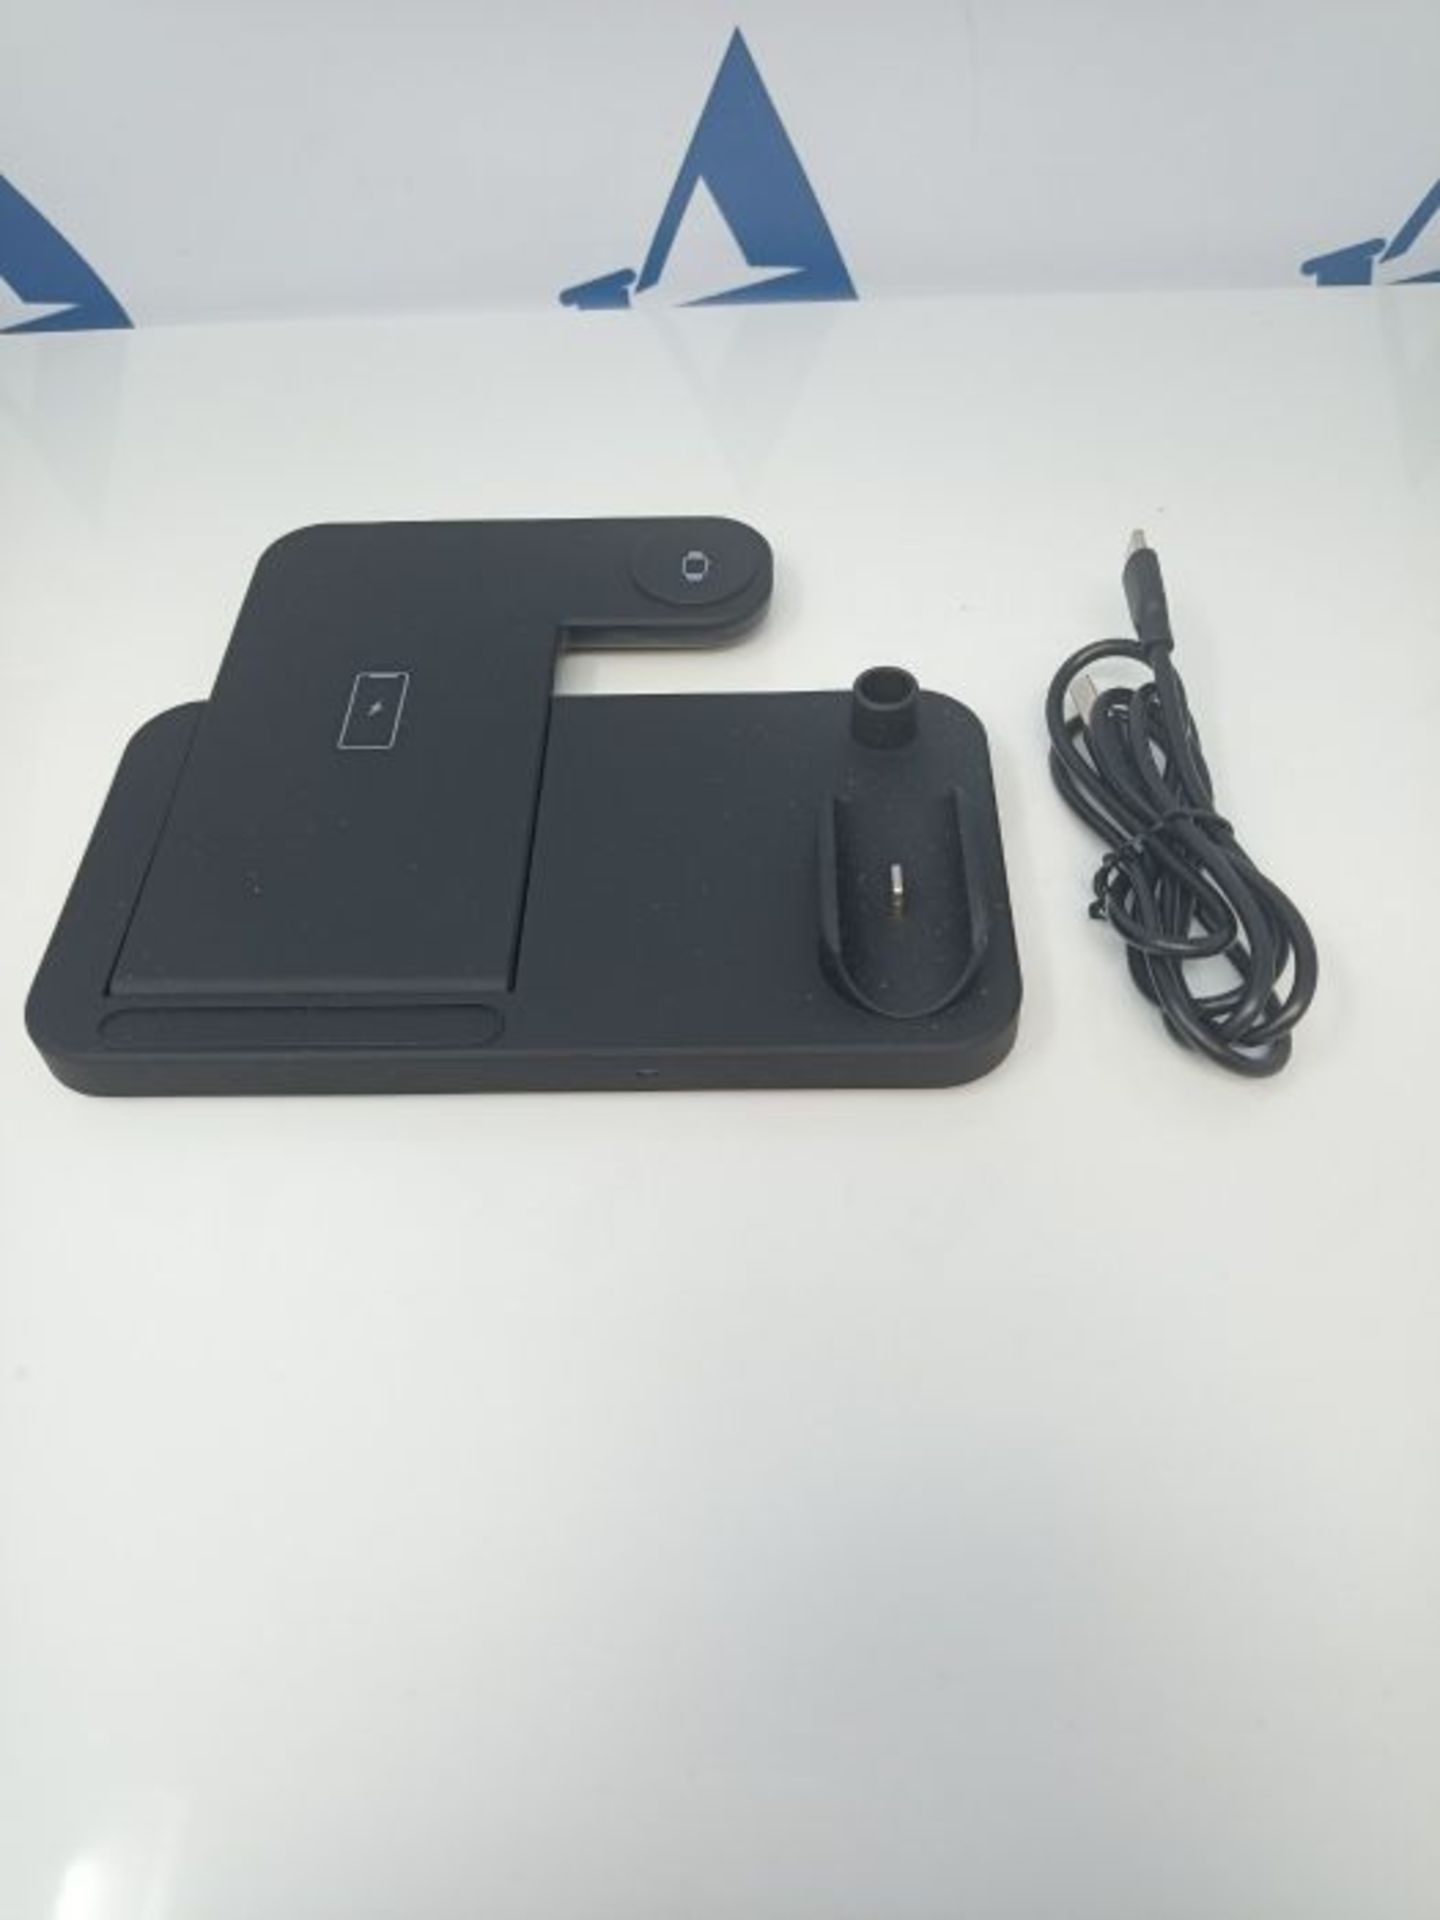 LECHLY Wireless Charger, 4 in 1 Induktive ladestation Kompatibel mit iPhone 13/12/12 P - Image 3 of 3